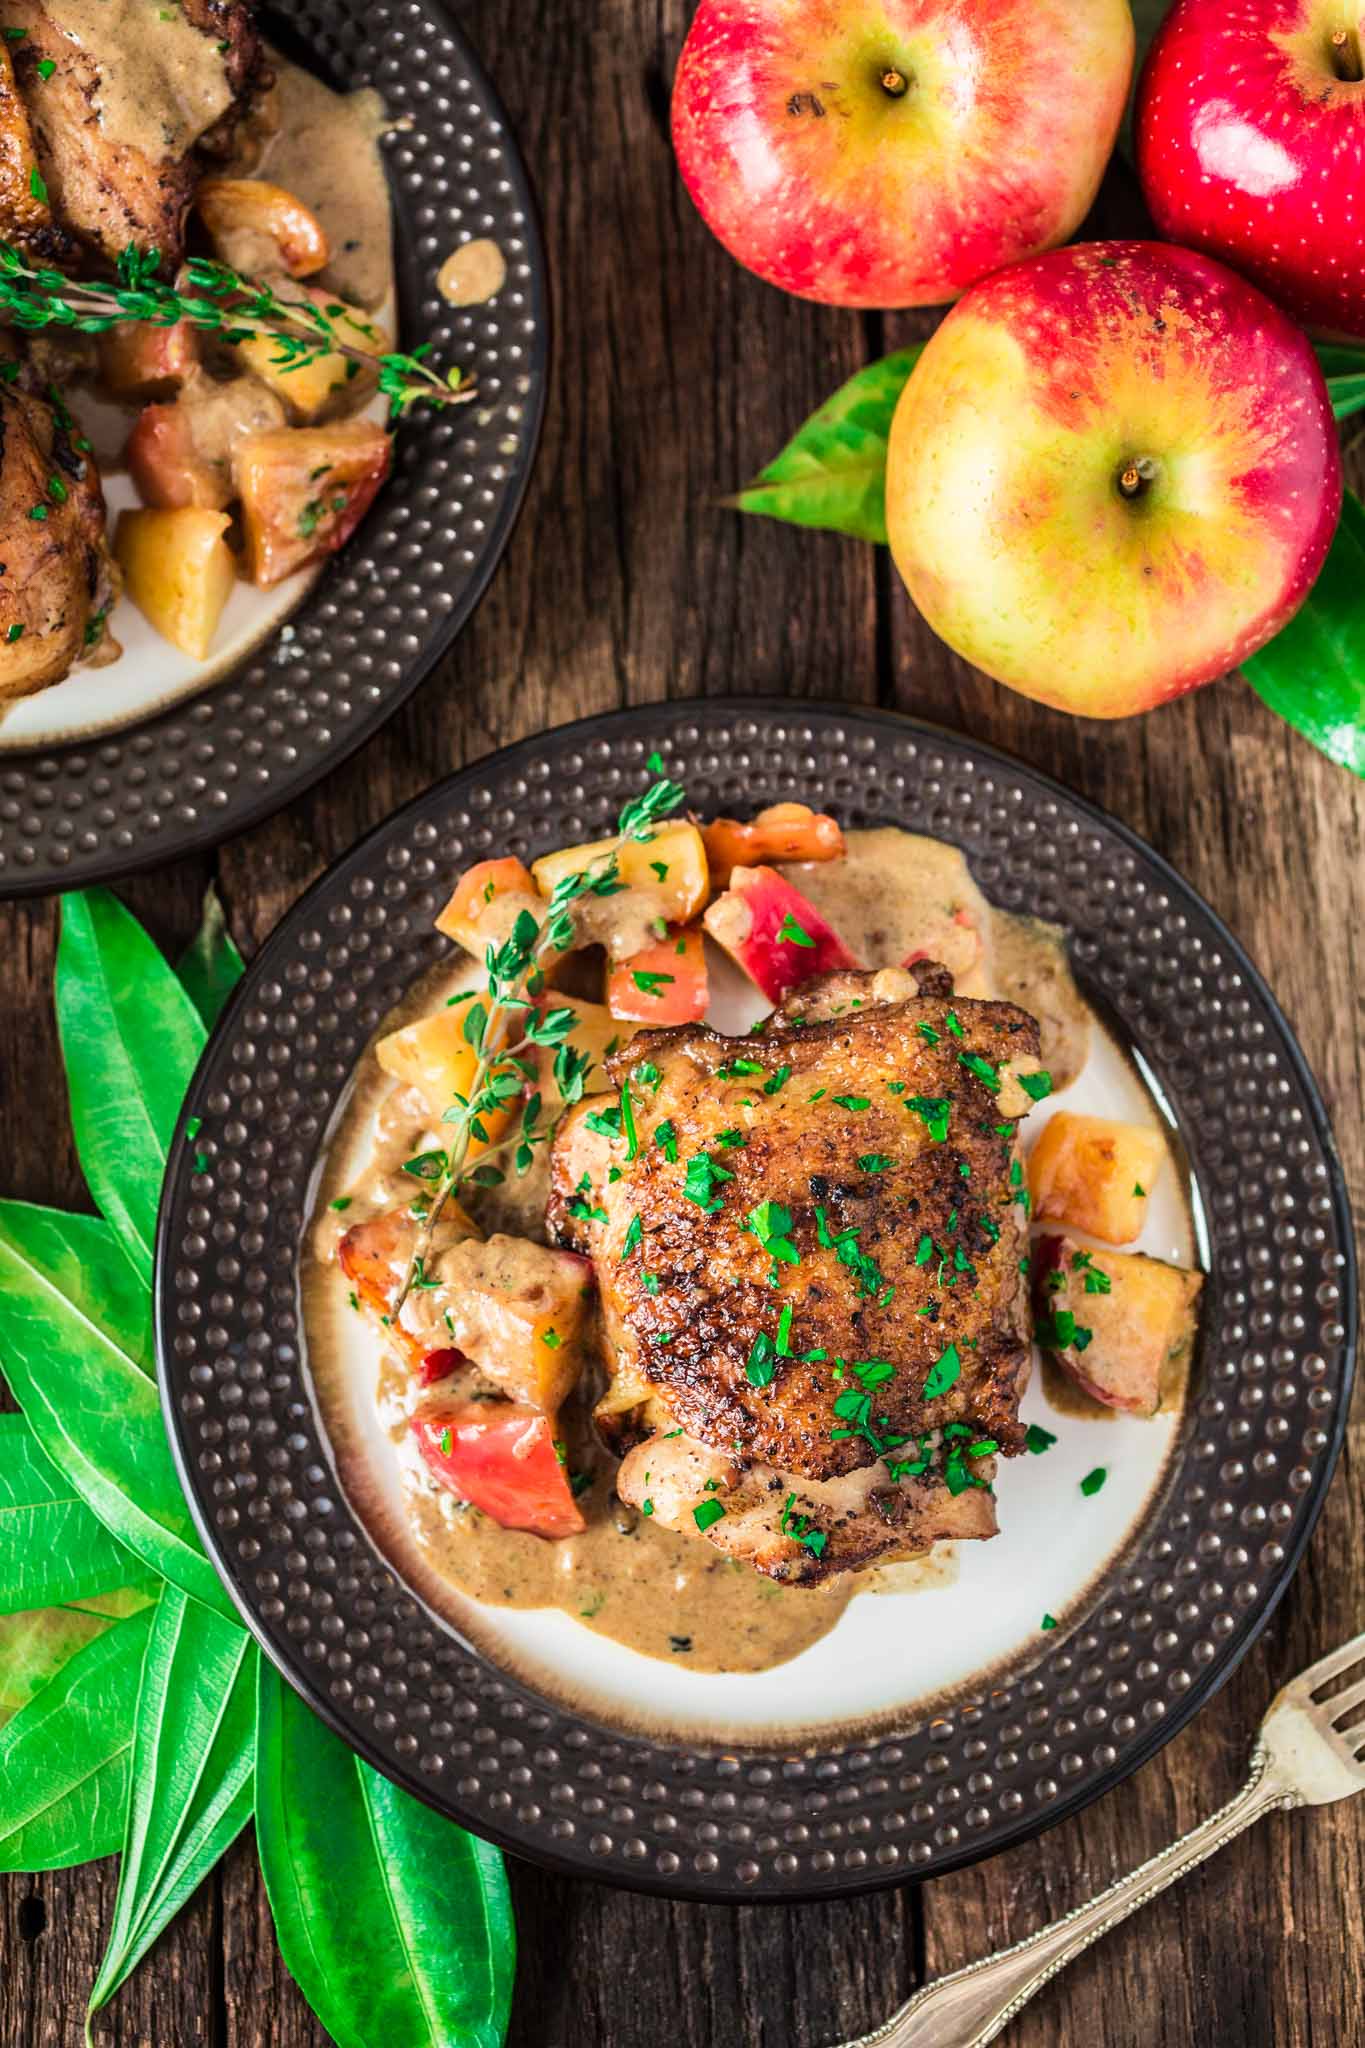 Poulet Vallée D'Auge | www.oliviascuisine.com | Apple lovers, rejoice! This Poulet Vallée D'Auge - a classic French chicken dish - is proof that autumn's favorite fruit is good for more than pies and works great in savory dishes too.